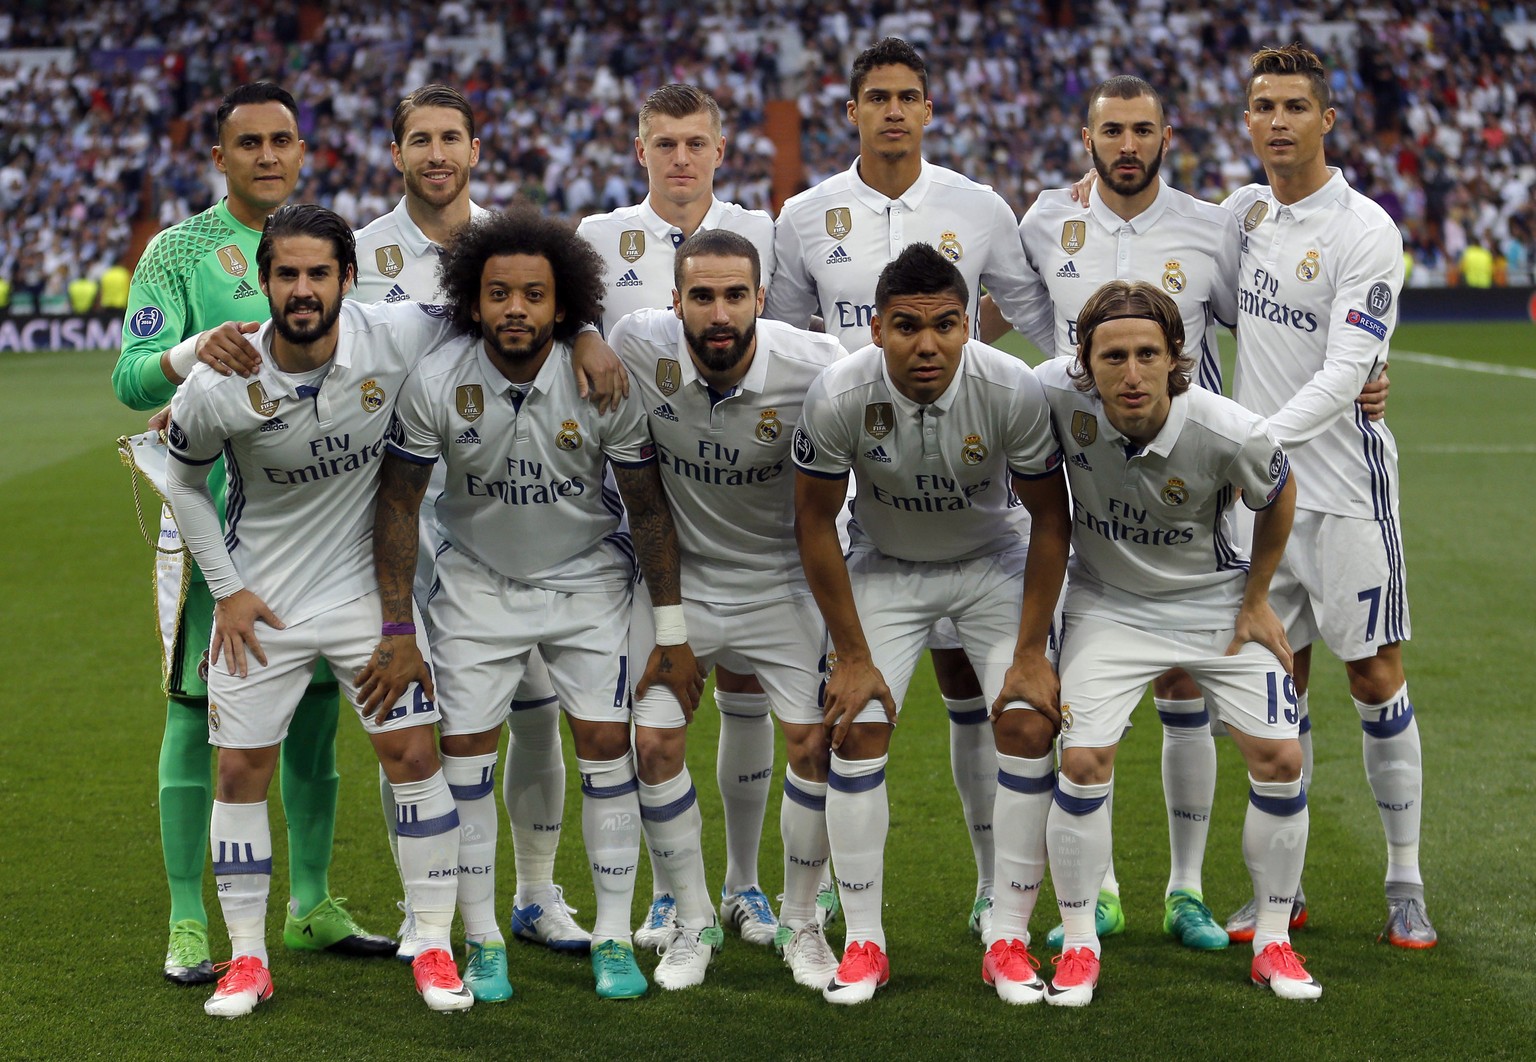 FILE - In this May 2, 2017.file photo, Real Madrid players pose for a photo ahead of the Champions League semifinal first leg soccer match between Real Madrid and Atletico Madrid at the Santiago Berna ...